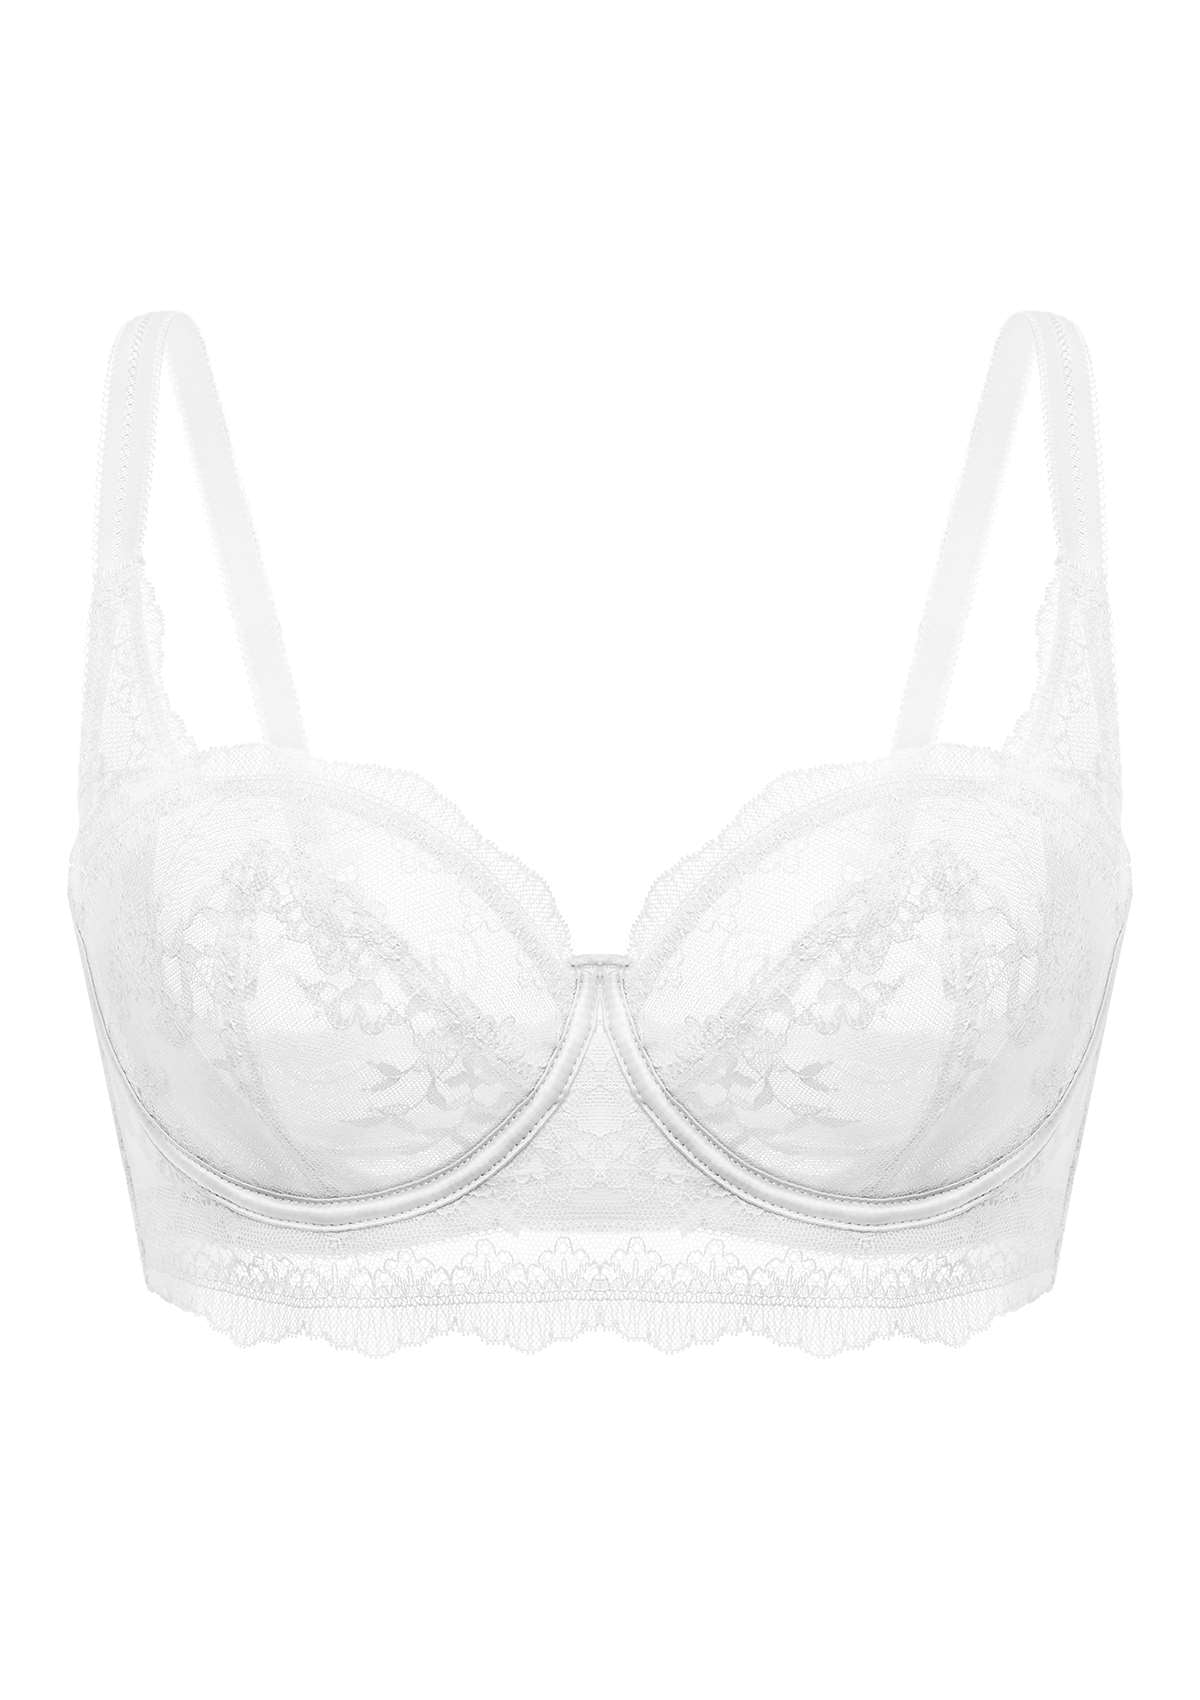 HSIA I Do Floral Lace Bridal Balconette Beautiful Bra For Special Day - Pink / 40 / C